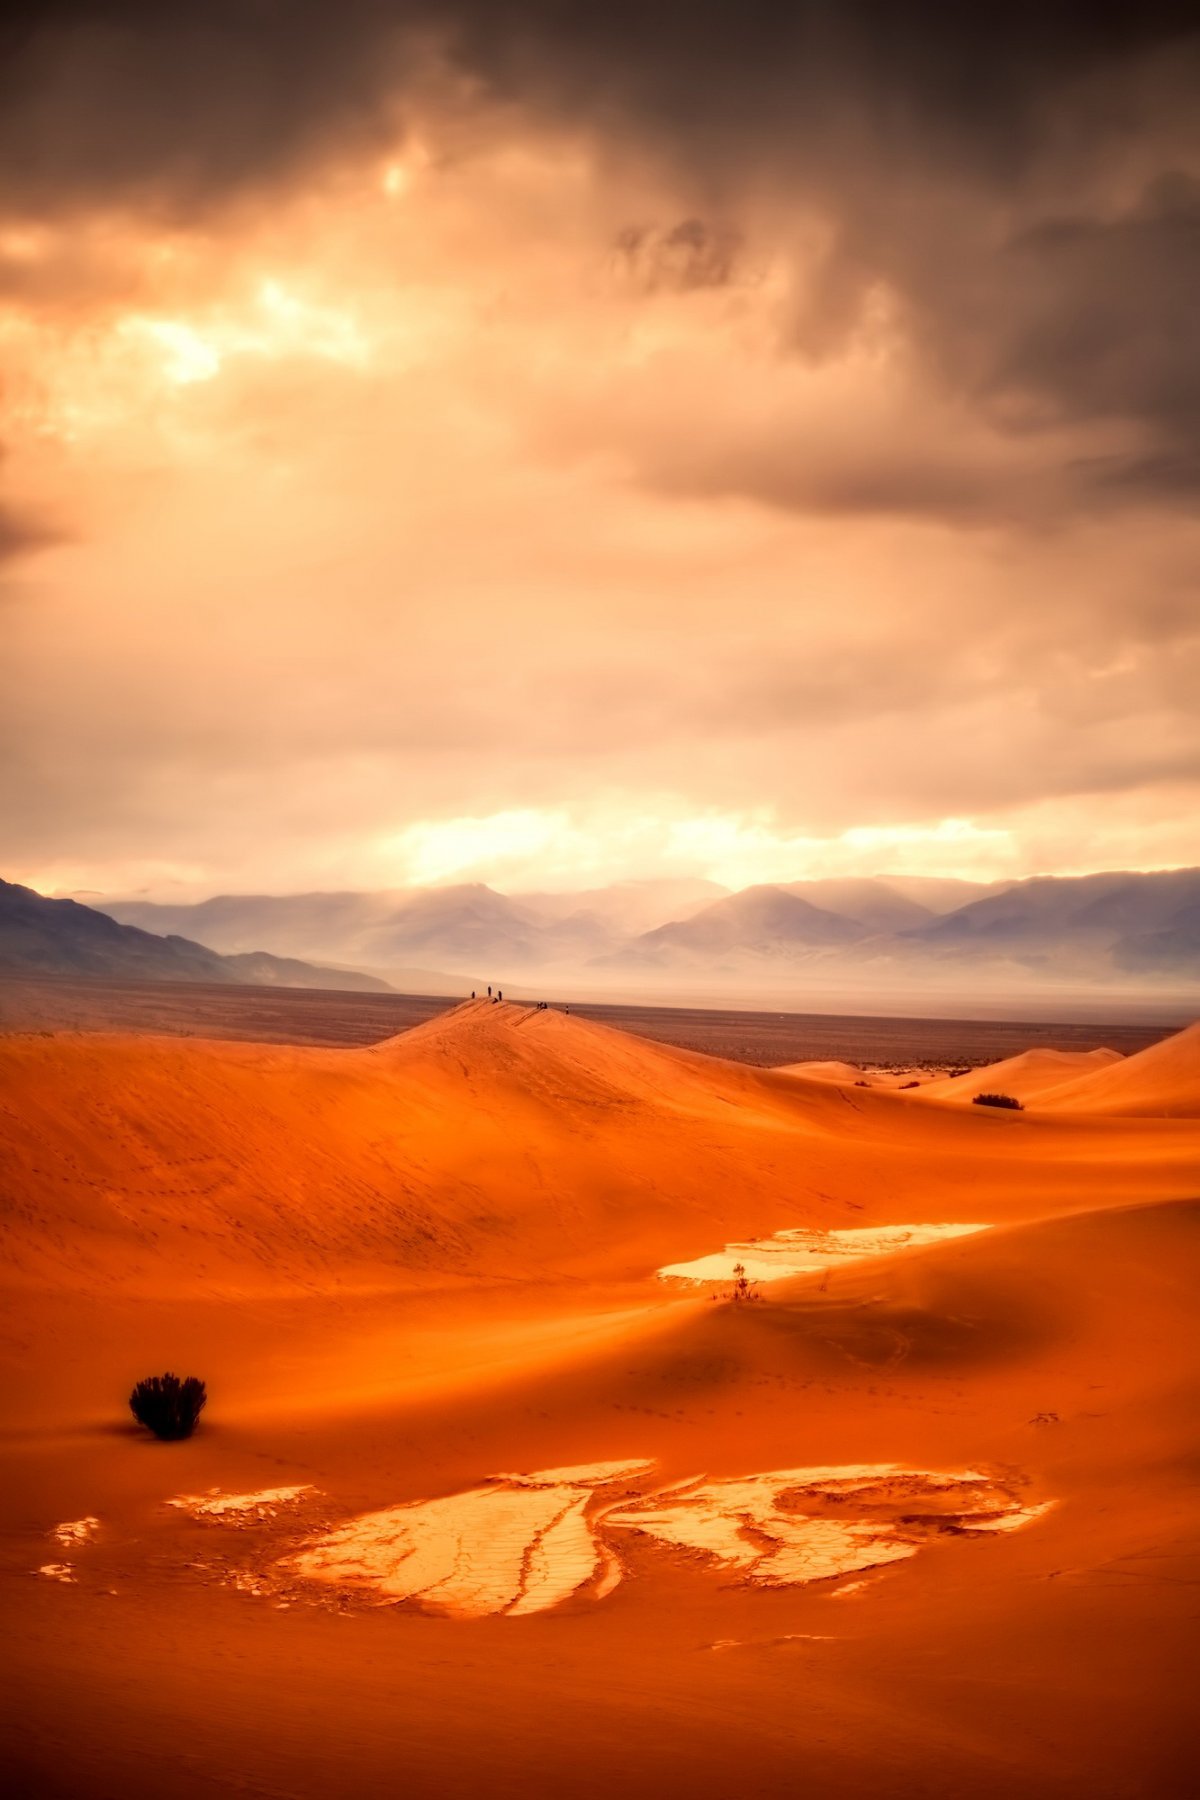 Beautiful scenery pictures of Death Valley